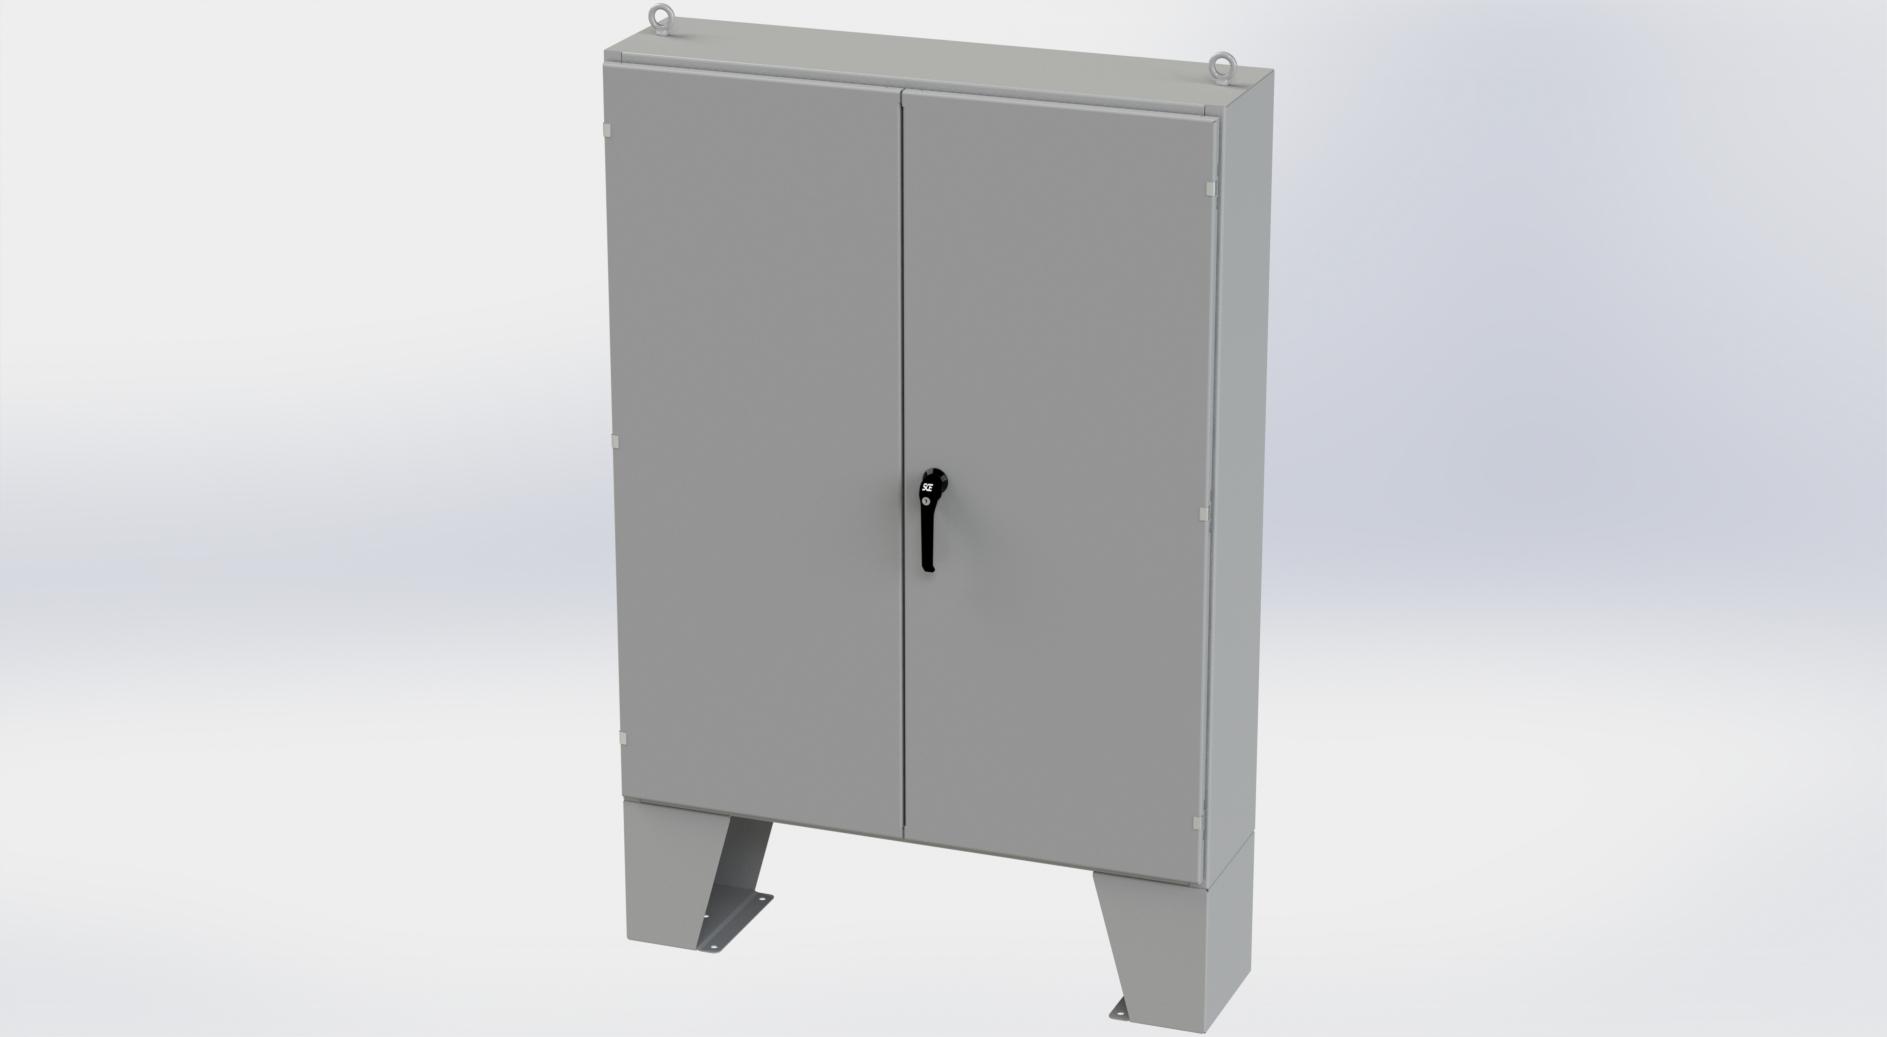 Saginaw Control SCE-604812LP 2DR LP Enclosure, Height:60.00", Width:48.00", Depth:12.00", ANSI-61 gray powder coating inside and out. Optional sub-panels are powder coated white.